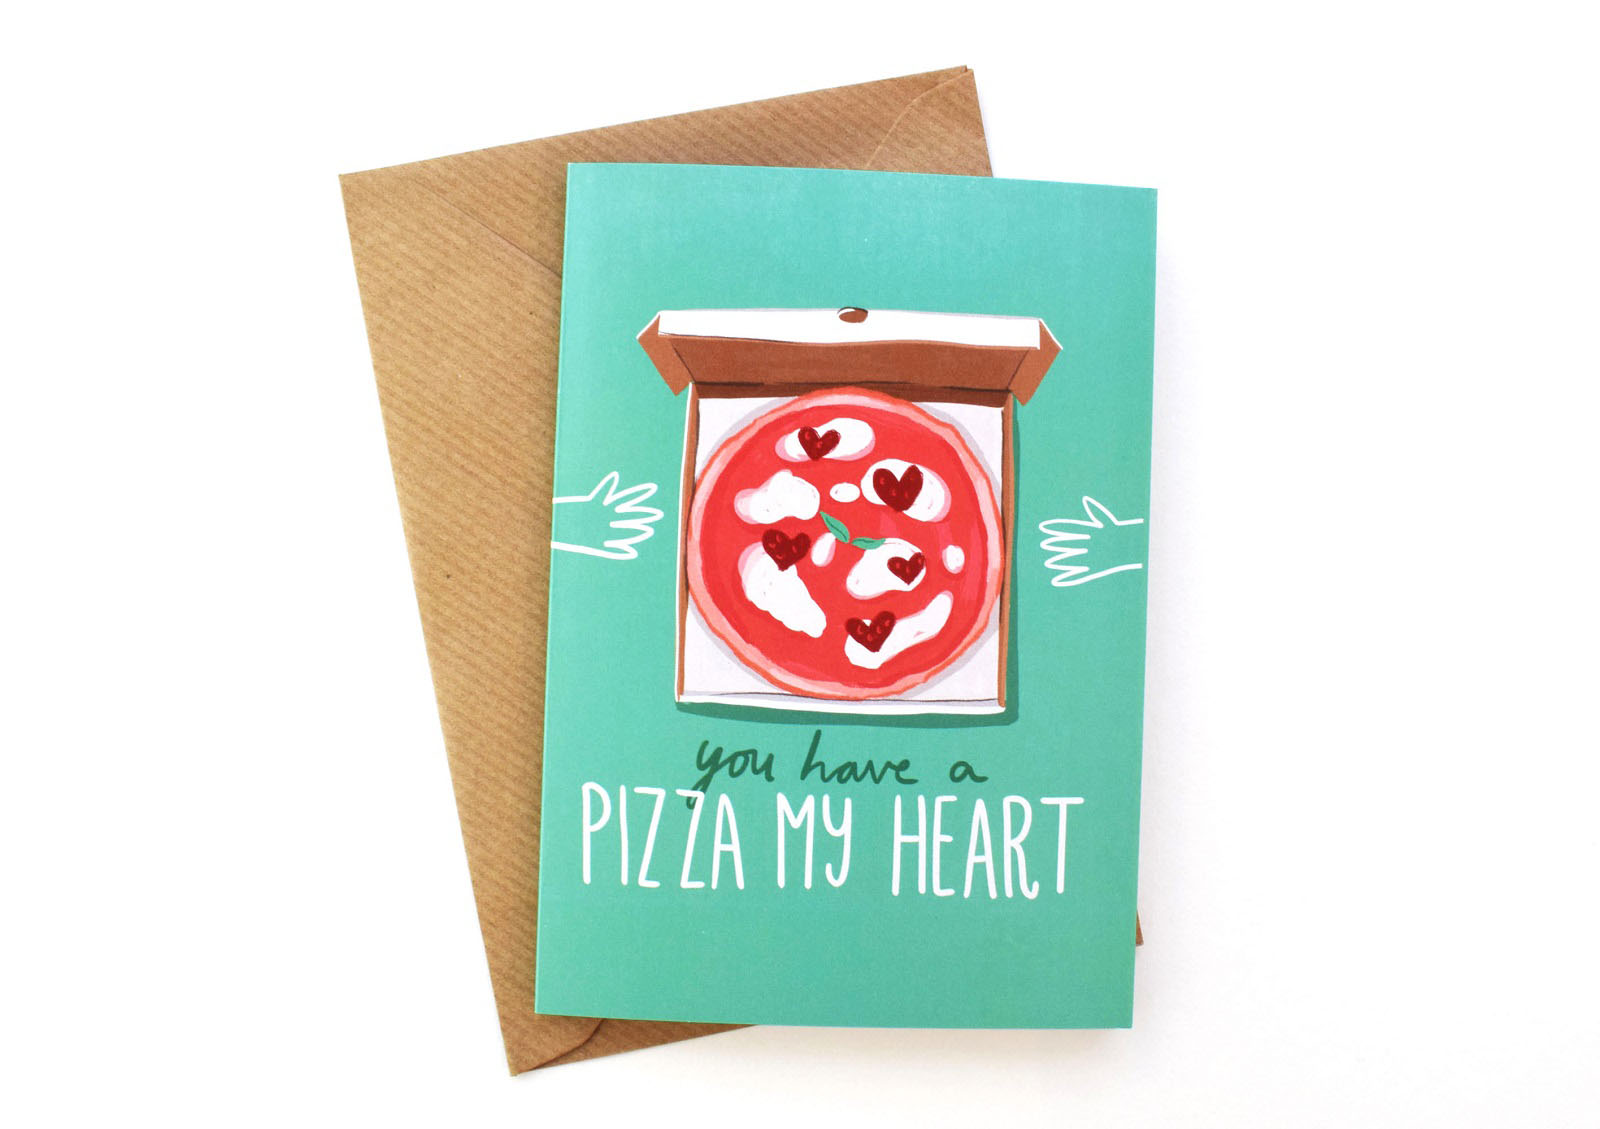 A card designed by Lauren which reads 'You have a pizza my heart' with an illustration of a pizza with love hearts on the top. 